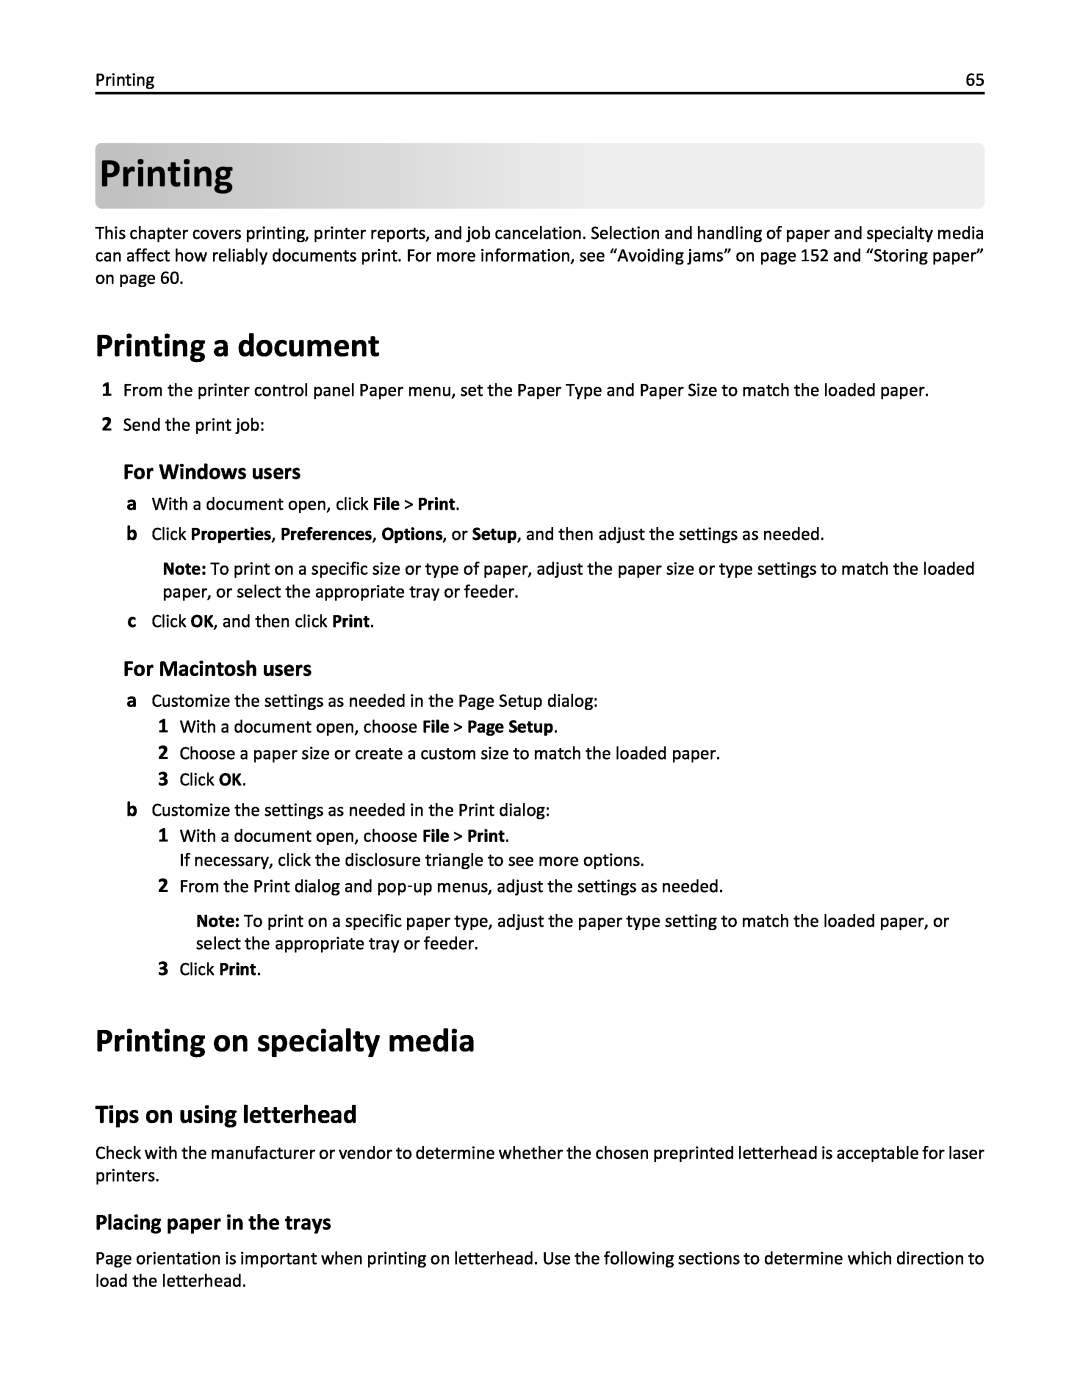 Lexmark 19Z0301 Printing a document, Printing on specialty media, Tips on using letterhead, Placing paper in the trays 